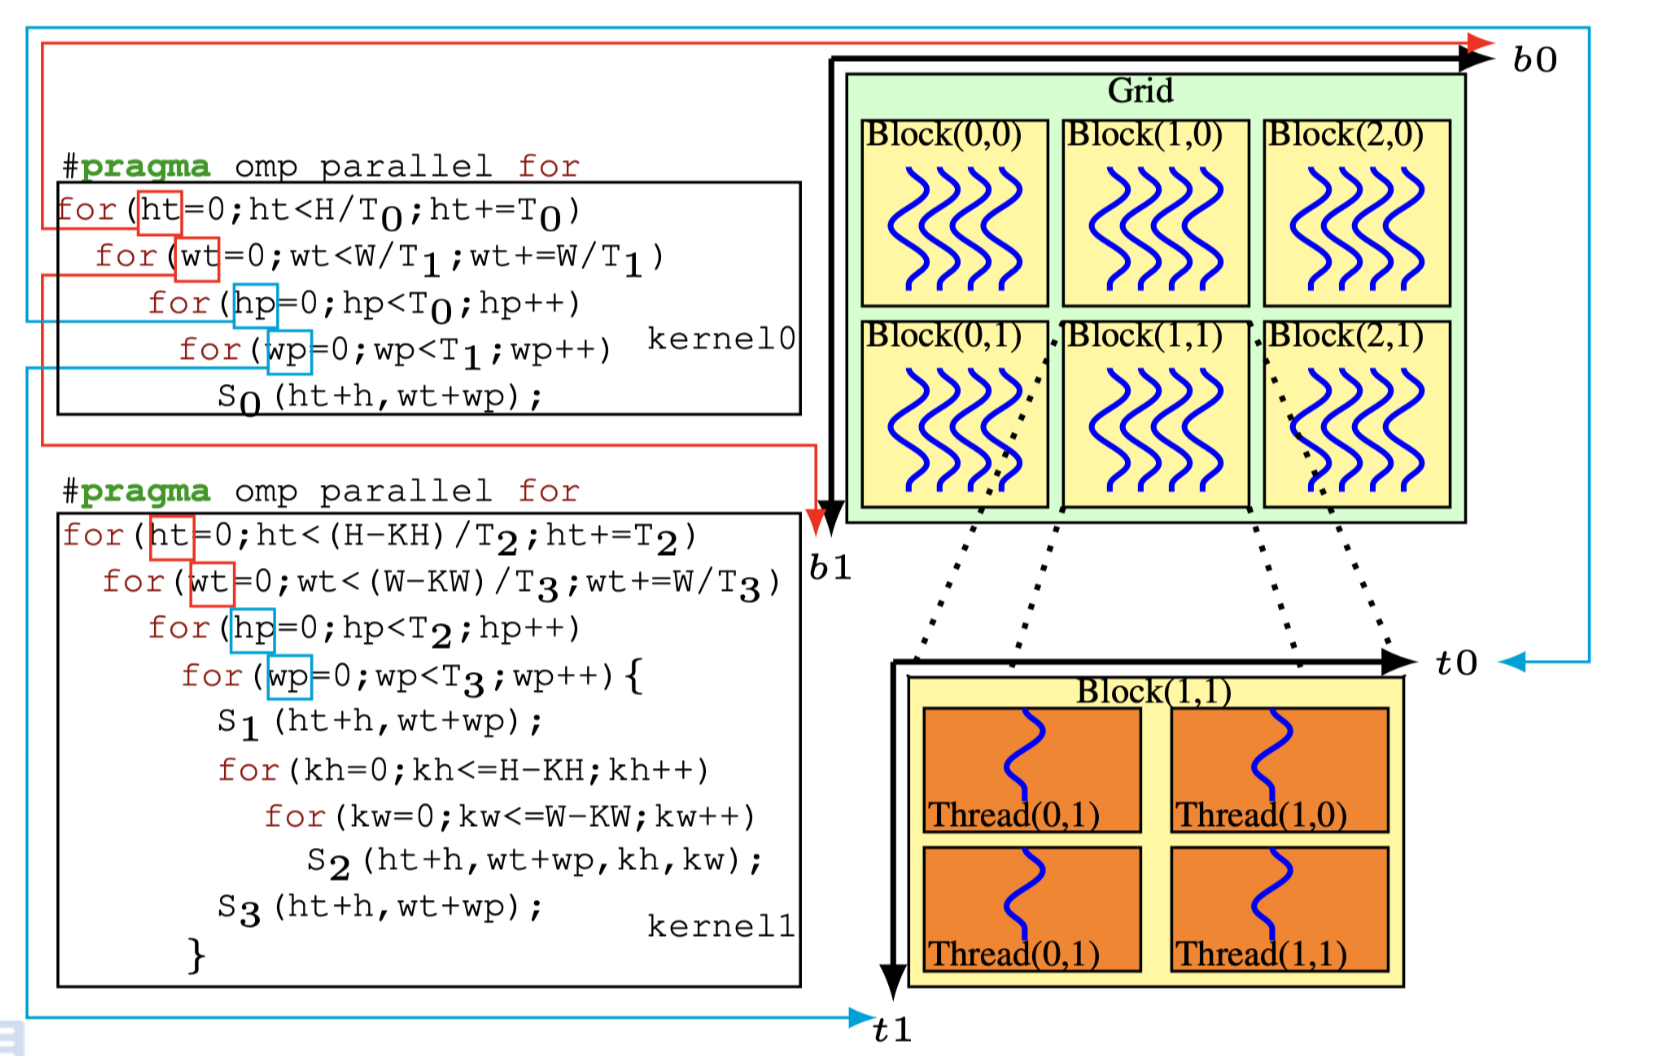 Fig.1(b): The code and GPU mapping of a conservative fusion heuristic